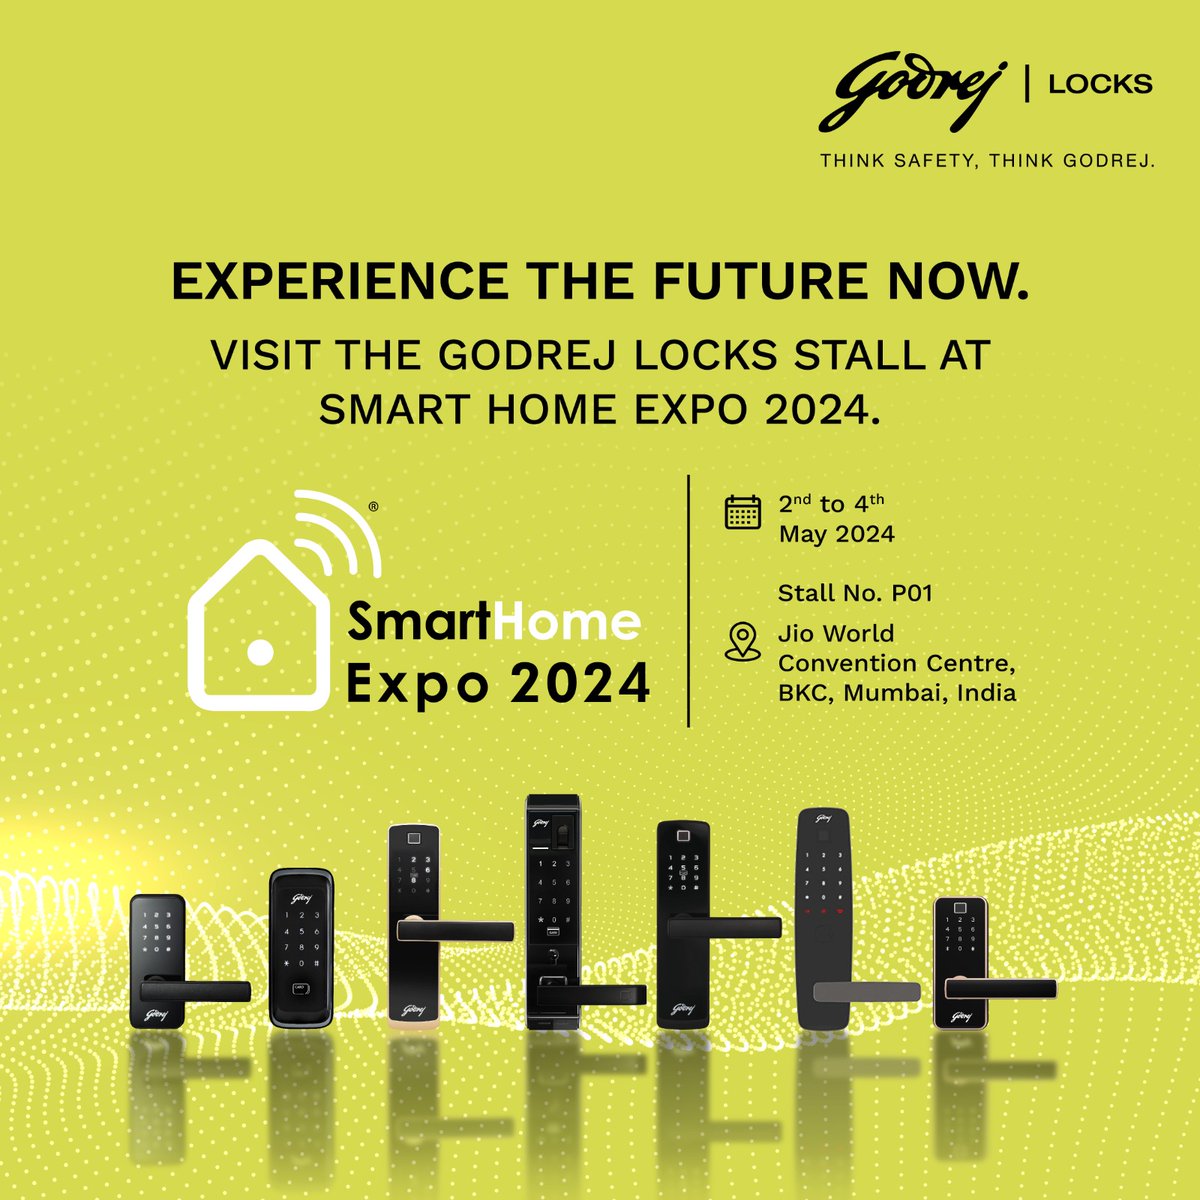 Visit the most innovative home safety locking solutions at Smart Home Expo 2024.
Address: Stall No. P01 Jio World Convention Centre, BKC, Mumbai.
Date: 2nd to 4th May 2024.
Time: 10.00 am to 6.00 pm.

#homesafety #visitus #smarthomeexpo2024